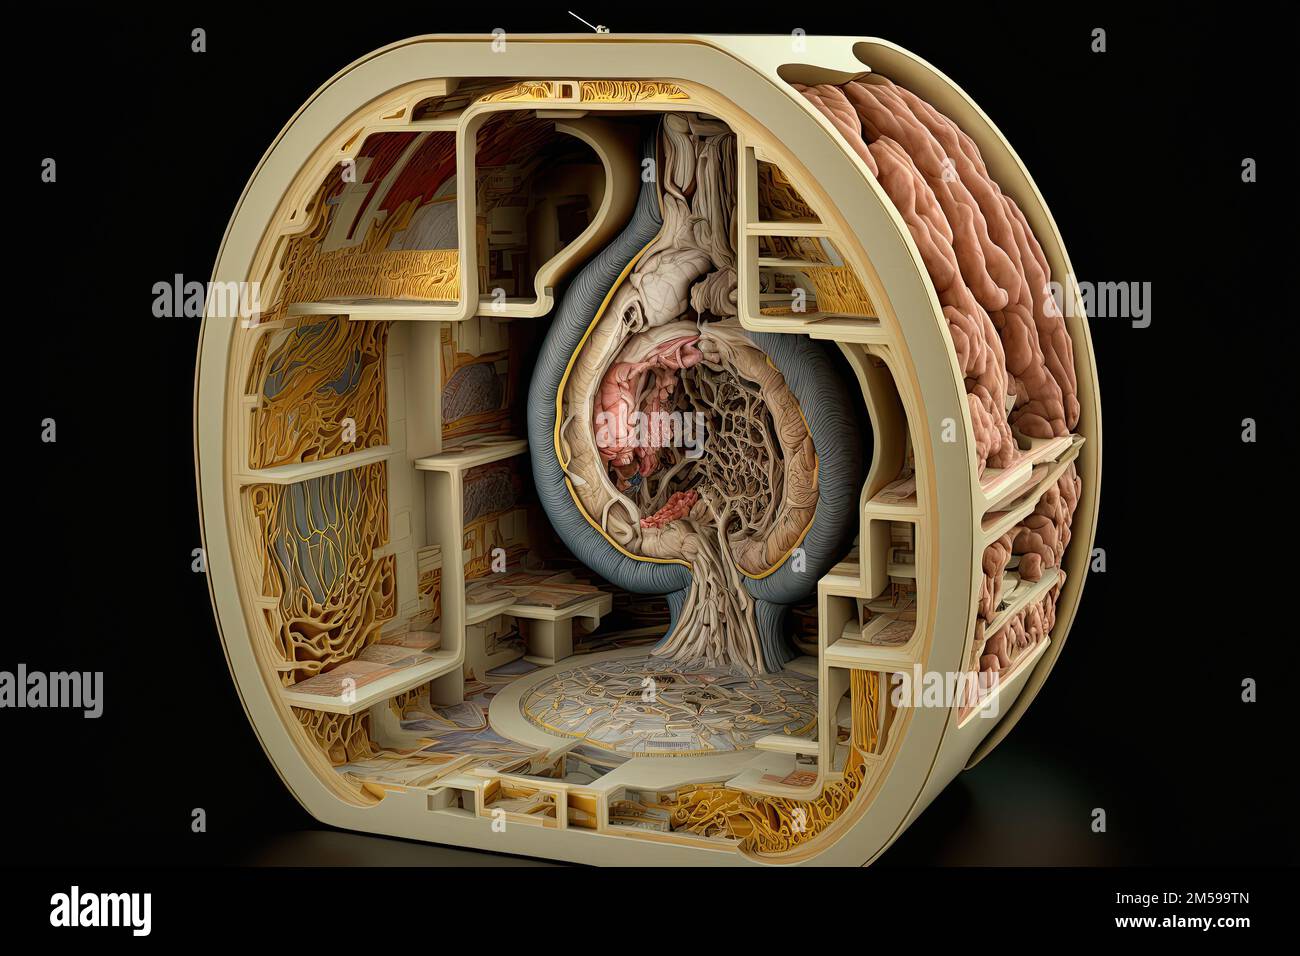 A cross-section of a cyborg's sci-fi fantasy human organ isolated on black background. These technologically advanced organs can provide augmented Stock Photo